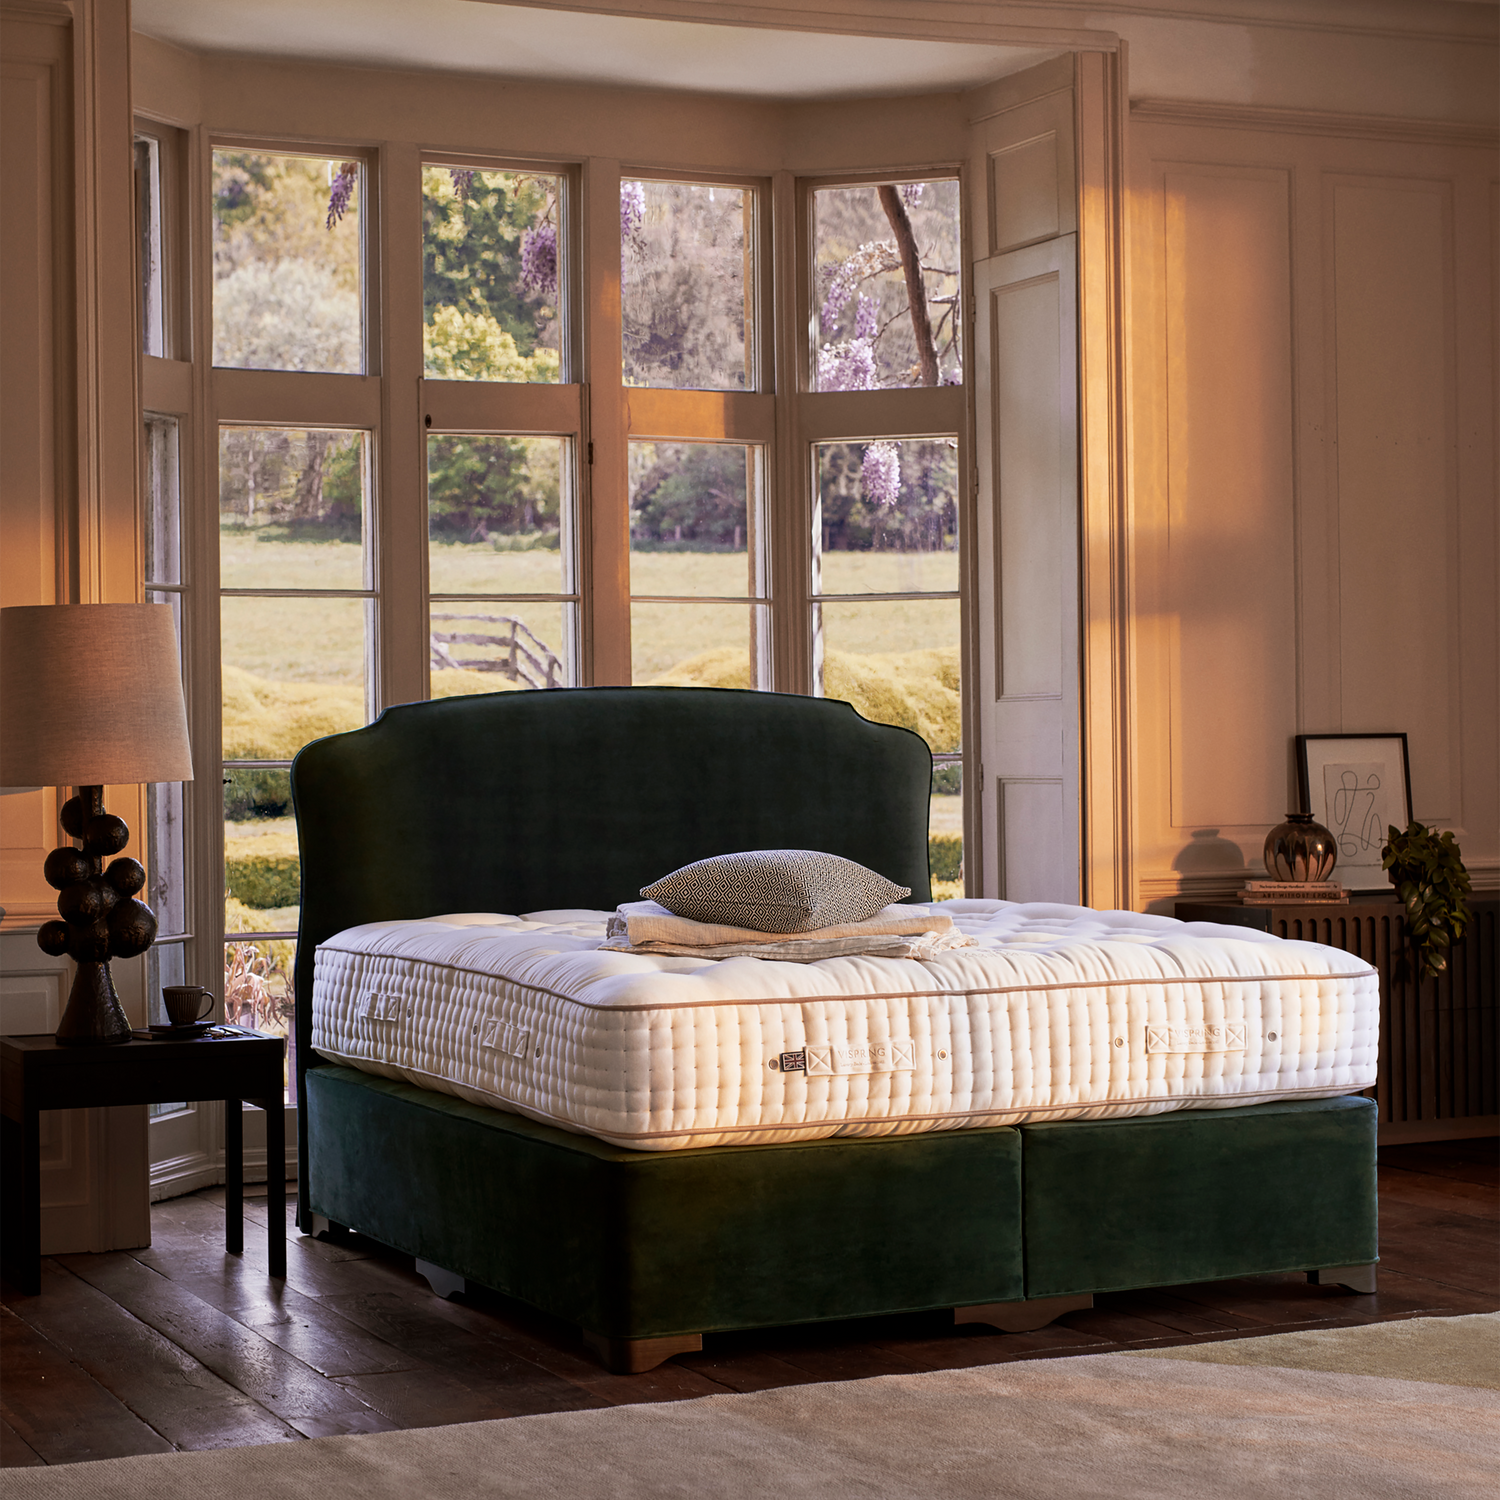 Vispring mattresses have been expertly handmade in England since 1901 and, as the name suggests, springs are the most important ingredient in the Vispring recipe as they work in harmony with the all natural fiber fillings and upholstery to create a balance of strength, durability, and softness.